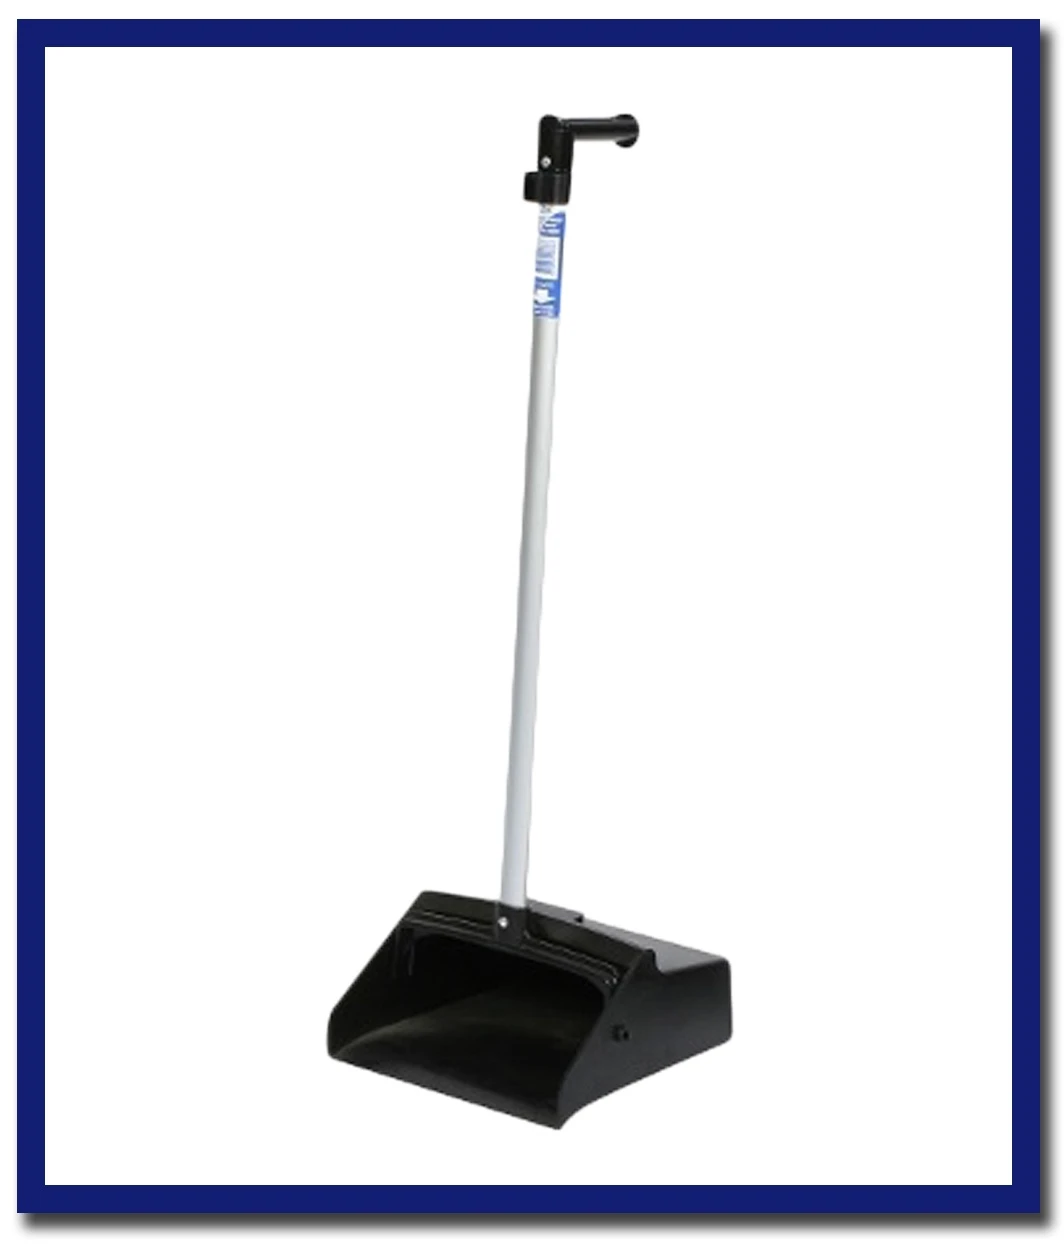 Edco Deluxe Lobby Pan - 1 Unit - Stone Doctor Australia - Cleaning Accessories > Sweeping > Deluxe Lobby Pan